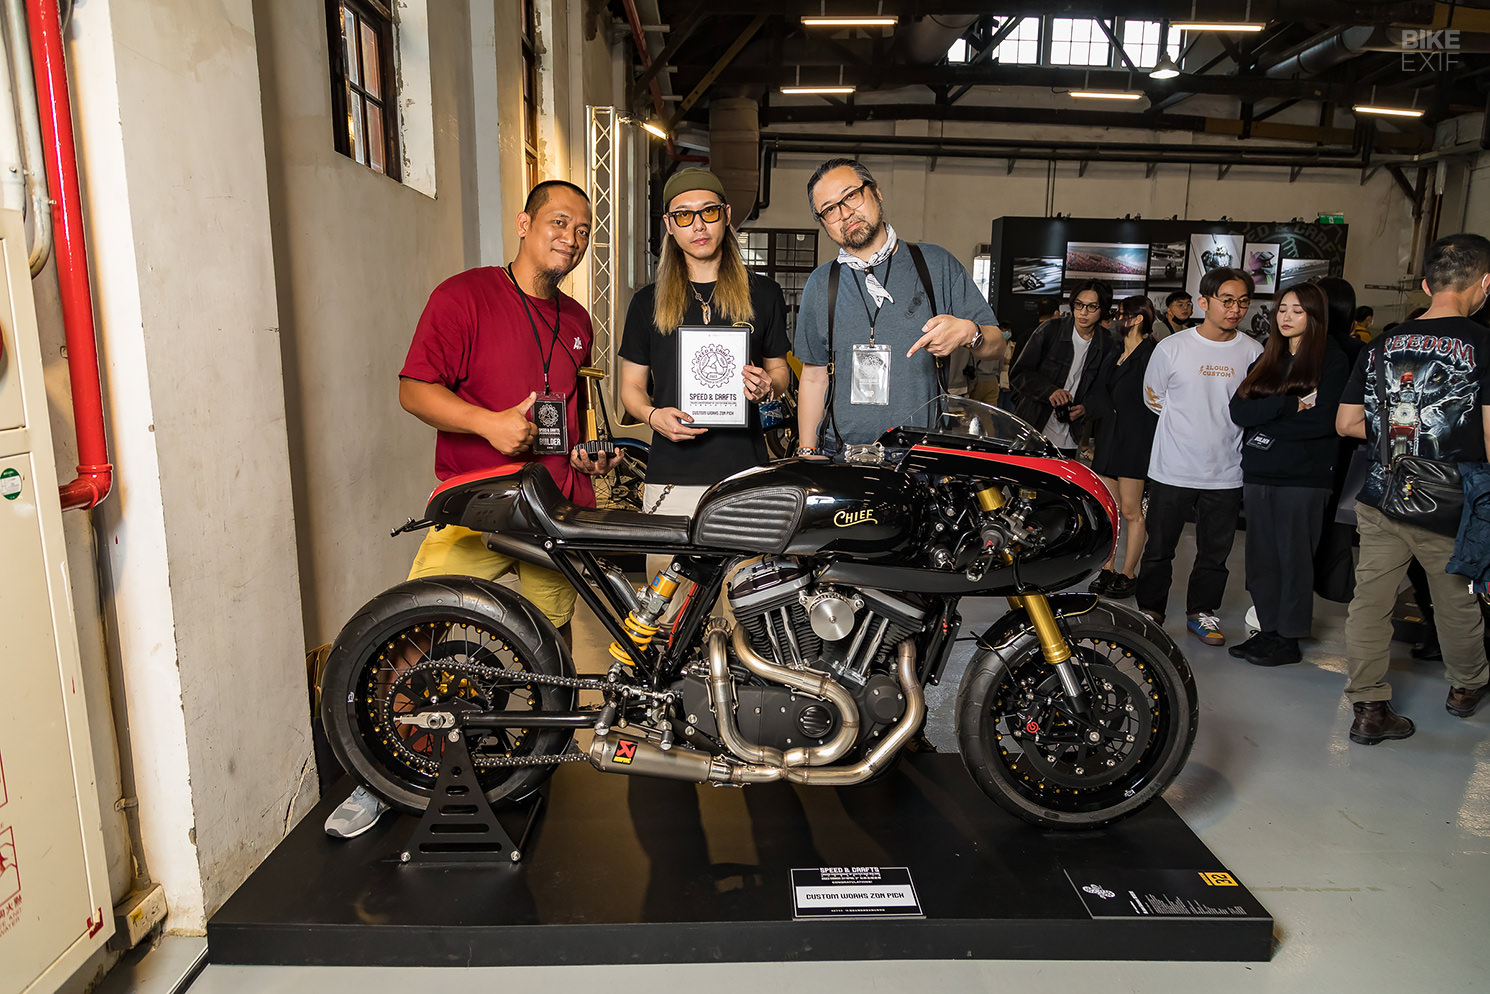 2023 Speed and Crafts custom motorcycle show